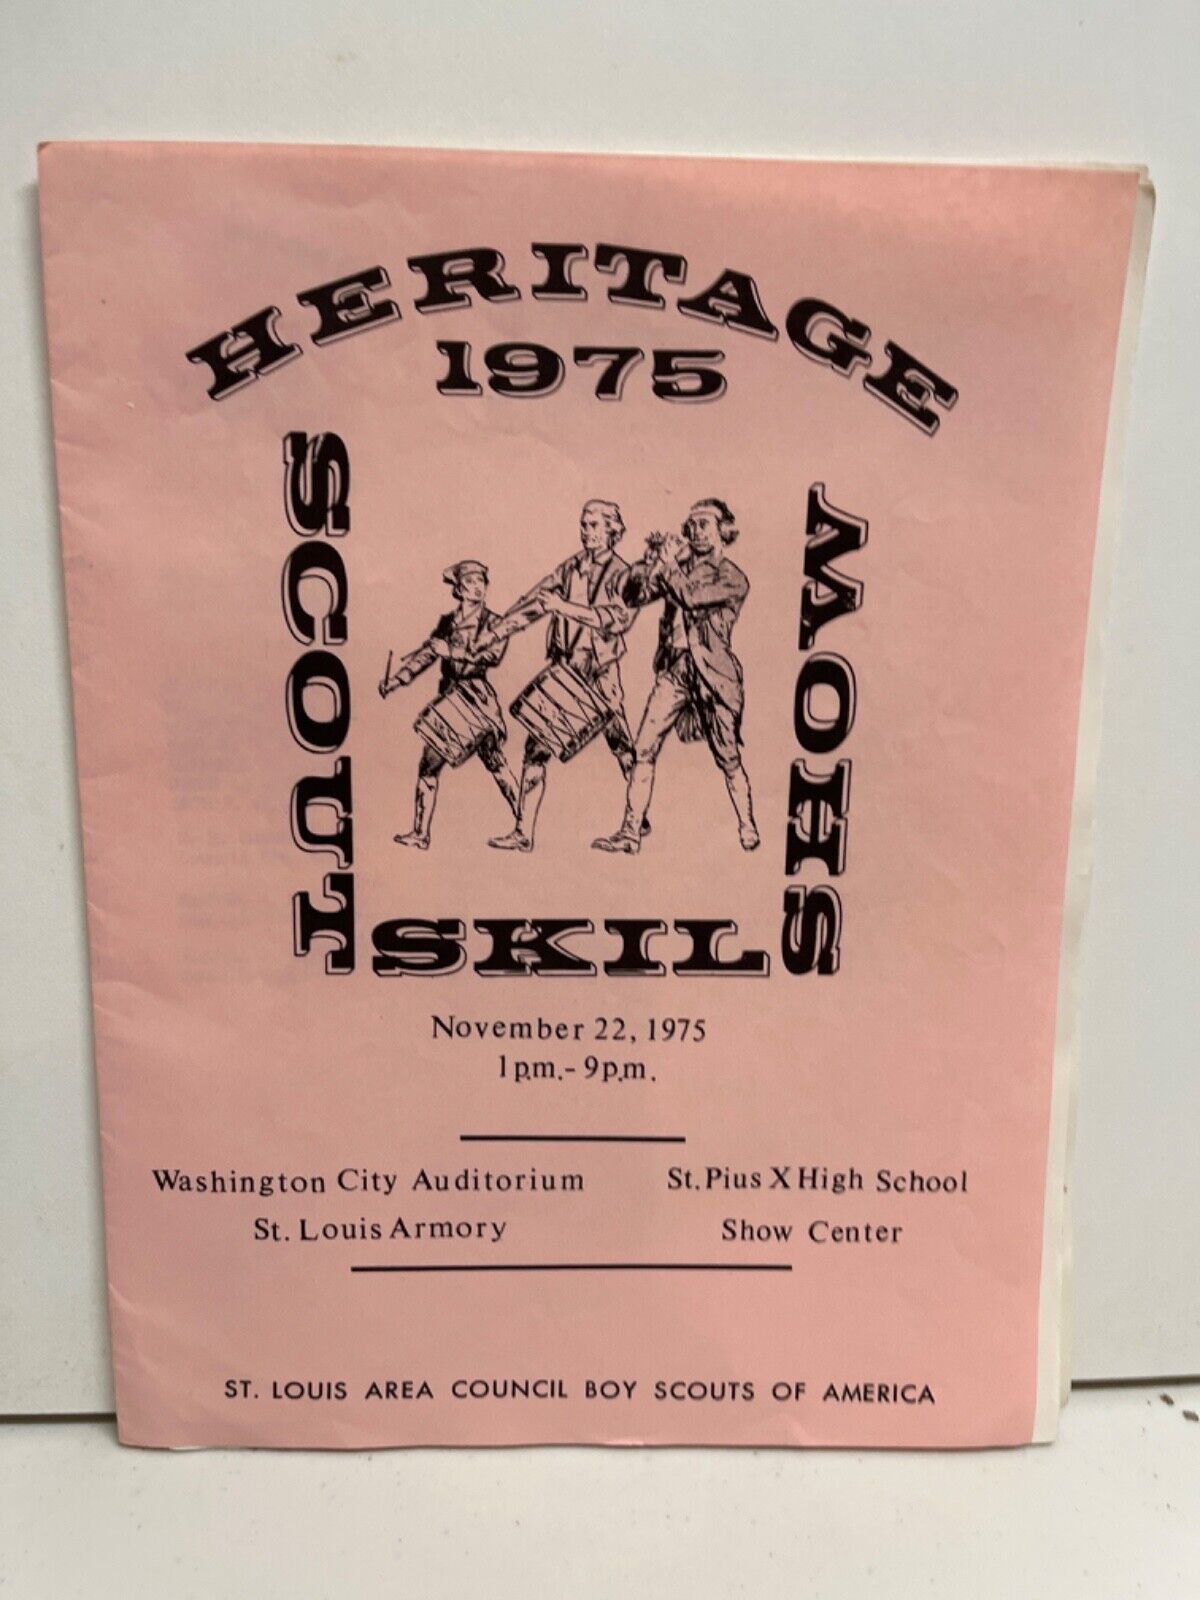 Heritage 1975 Boy Scout Skill Booth Guide St. Louis, St. Pius X High Scho